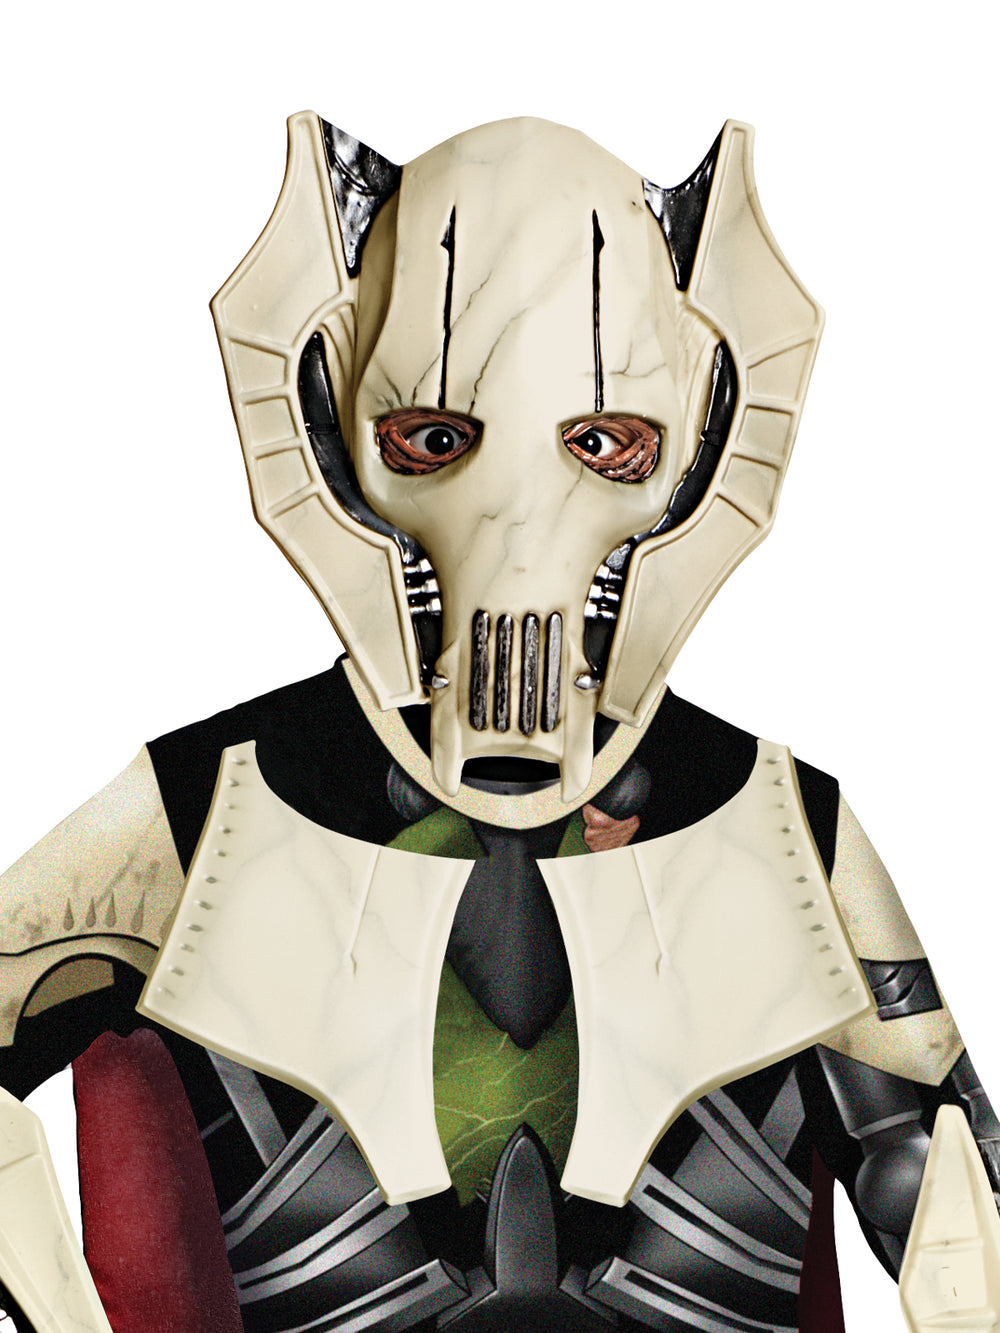 GENERAL GRIEVOUS DELUXE COSTUME, CHILD - Little Shop of Horrors